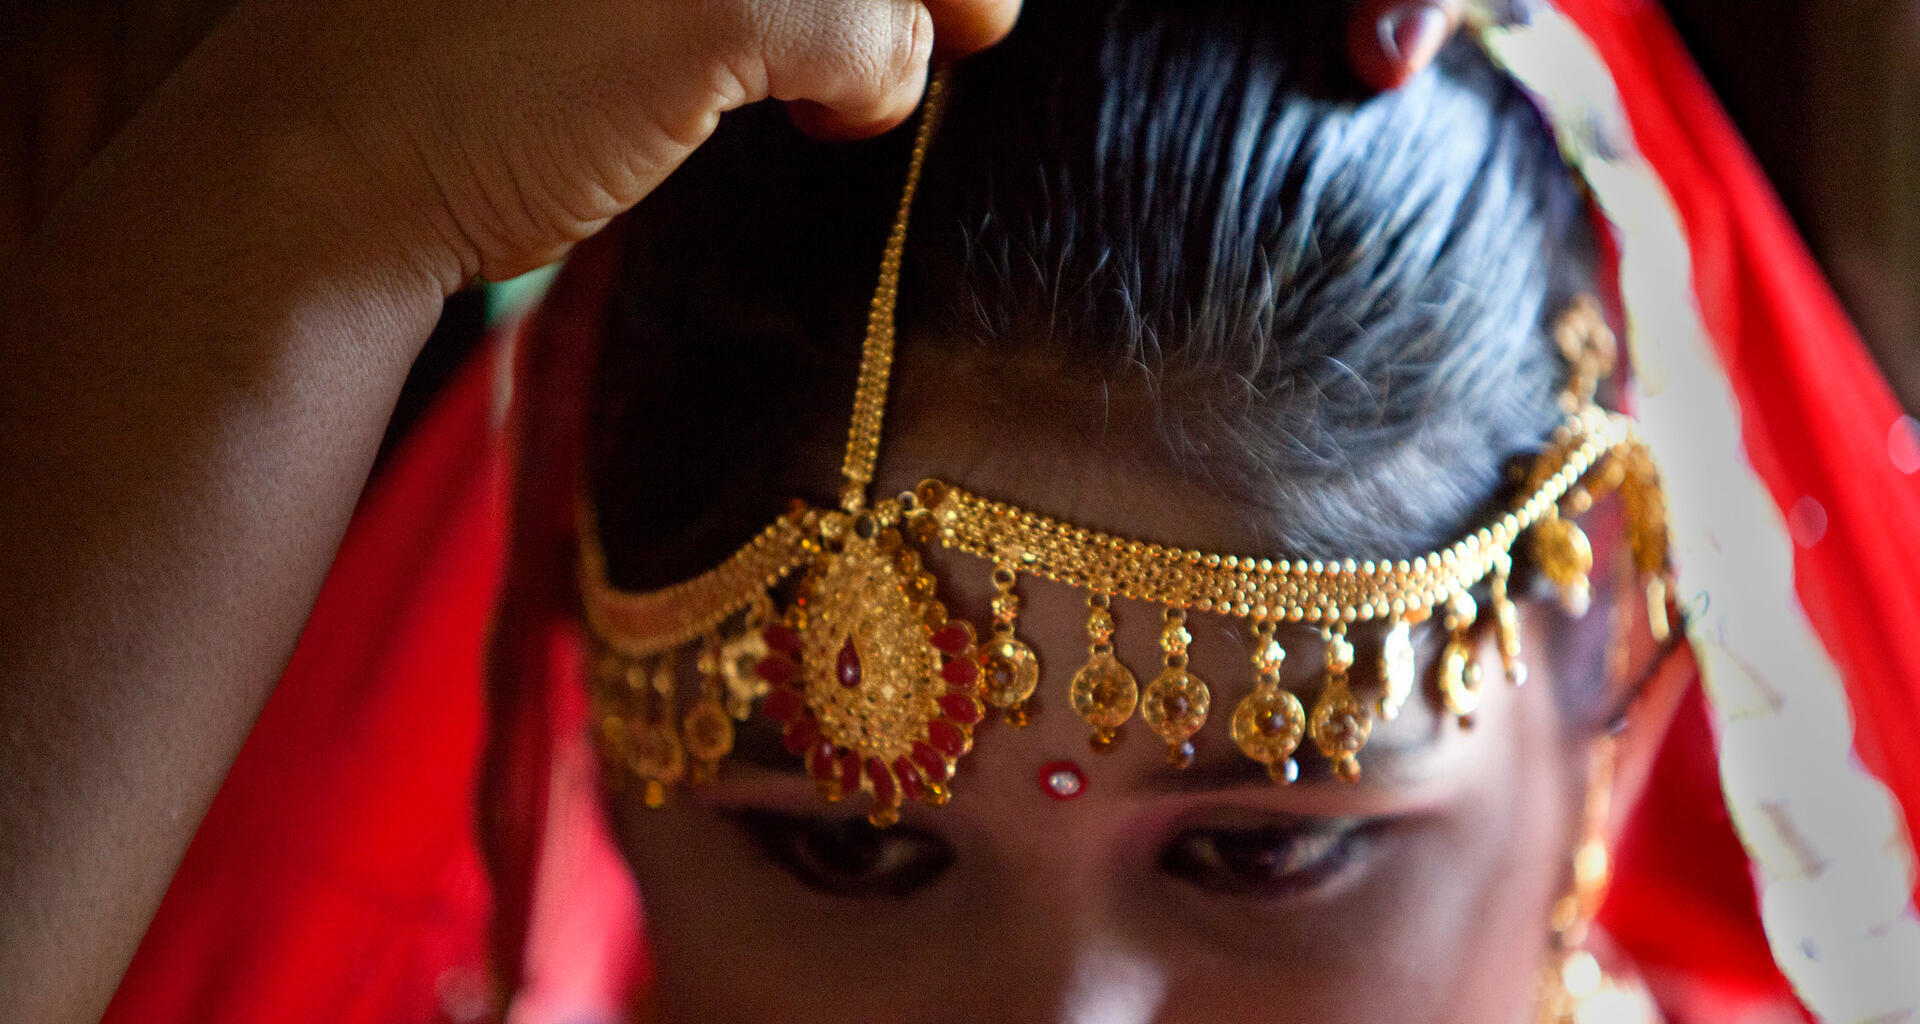 Child marriage pic